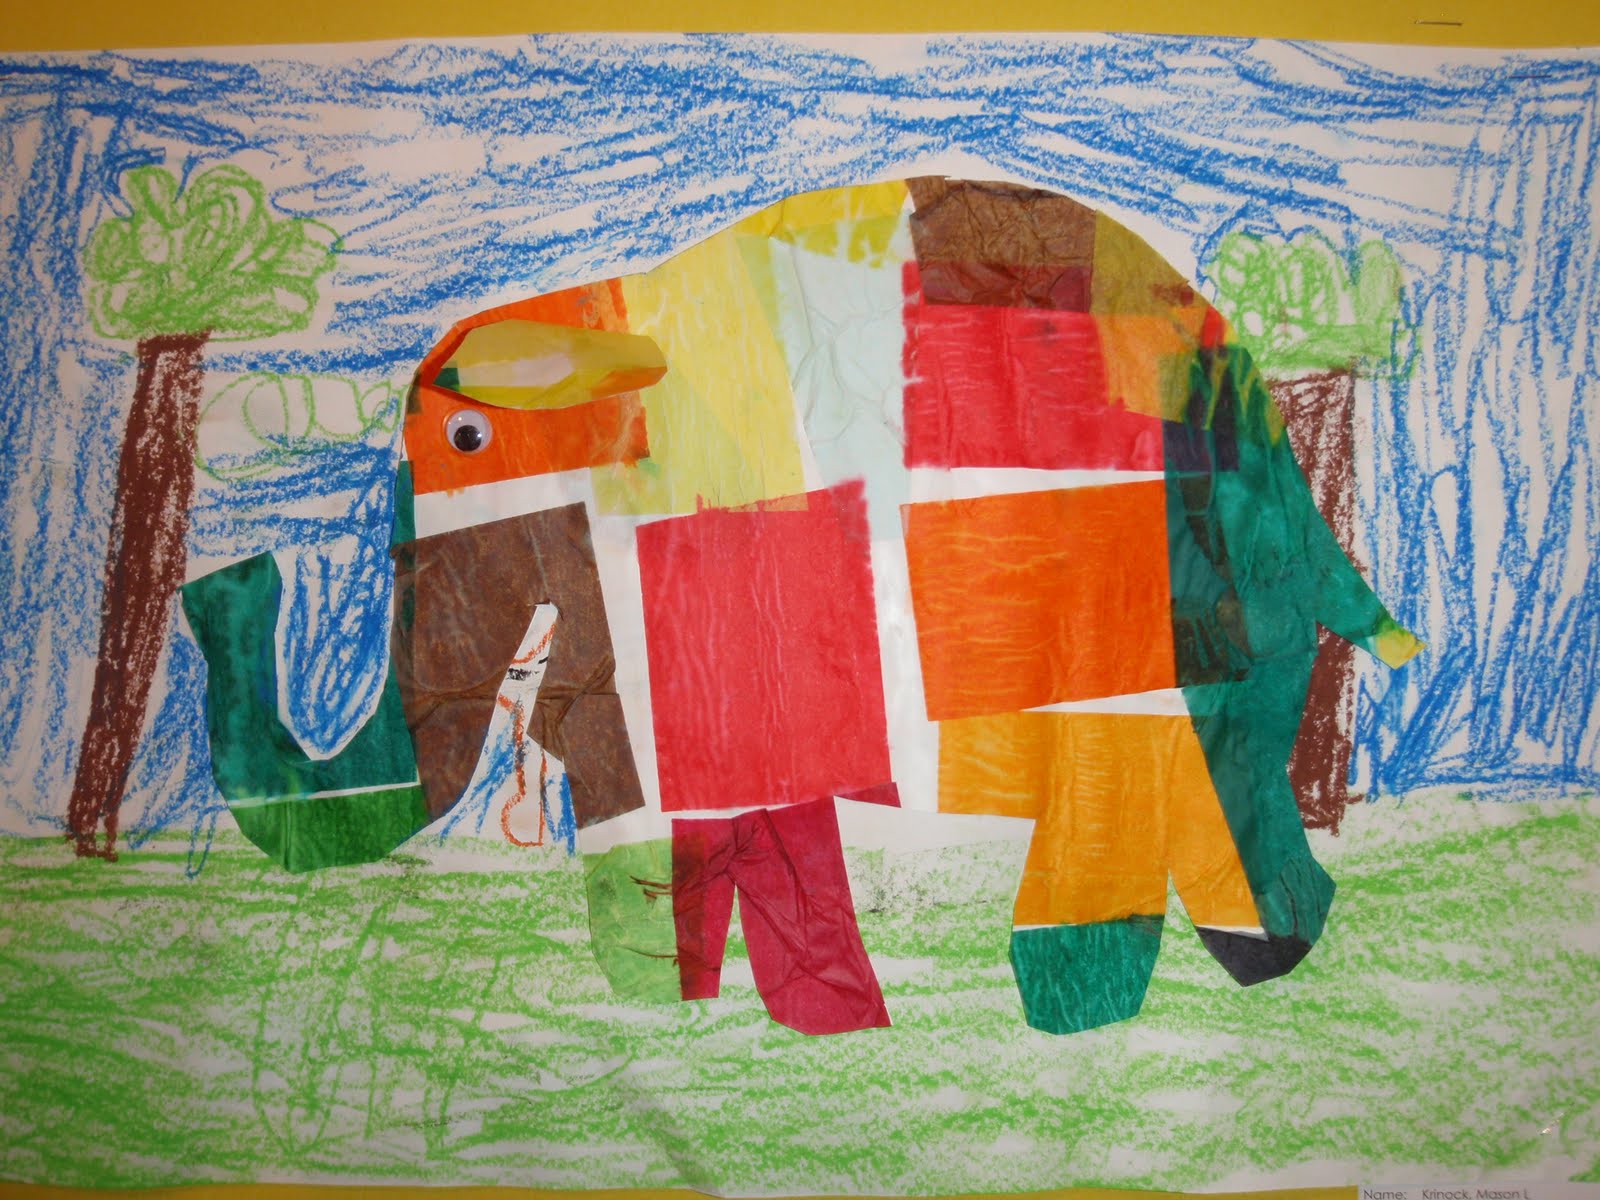 make-it-a-fun-friday-with-these-awesome-elmer-the-elephant-activities